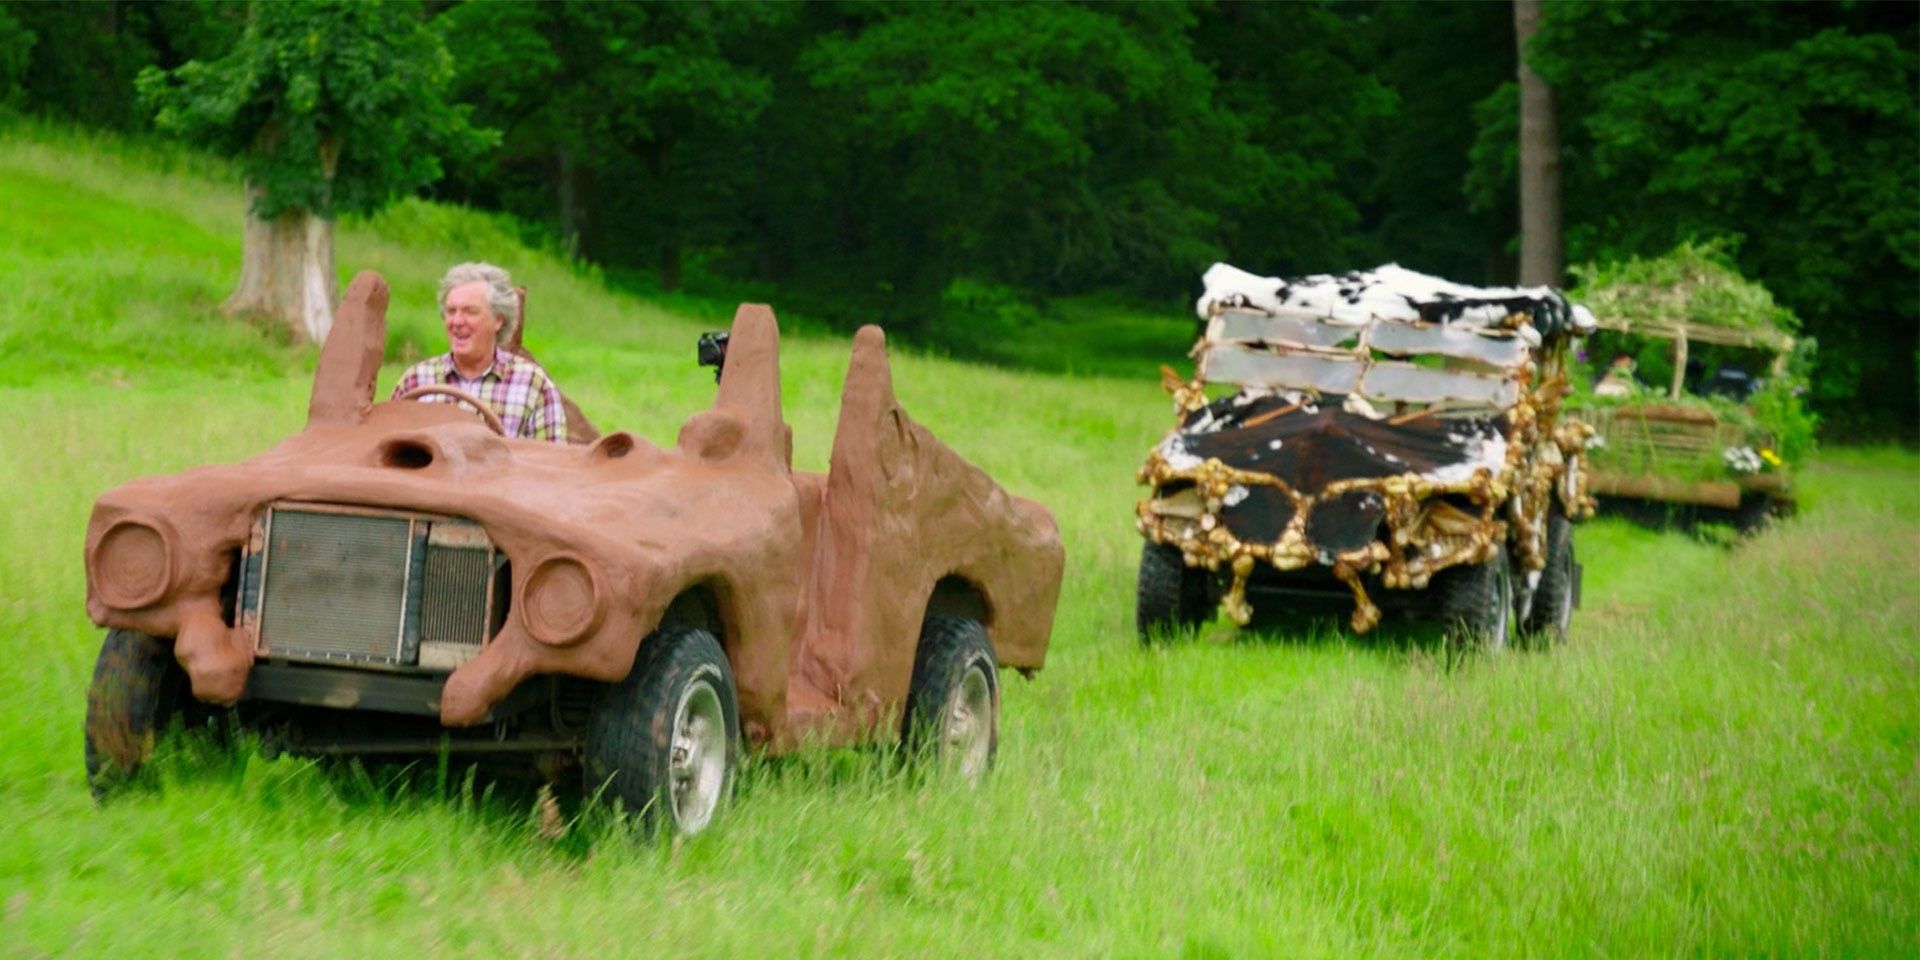 Three Eco-friendly cars made by Grand Tour hosts on a grassy field